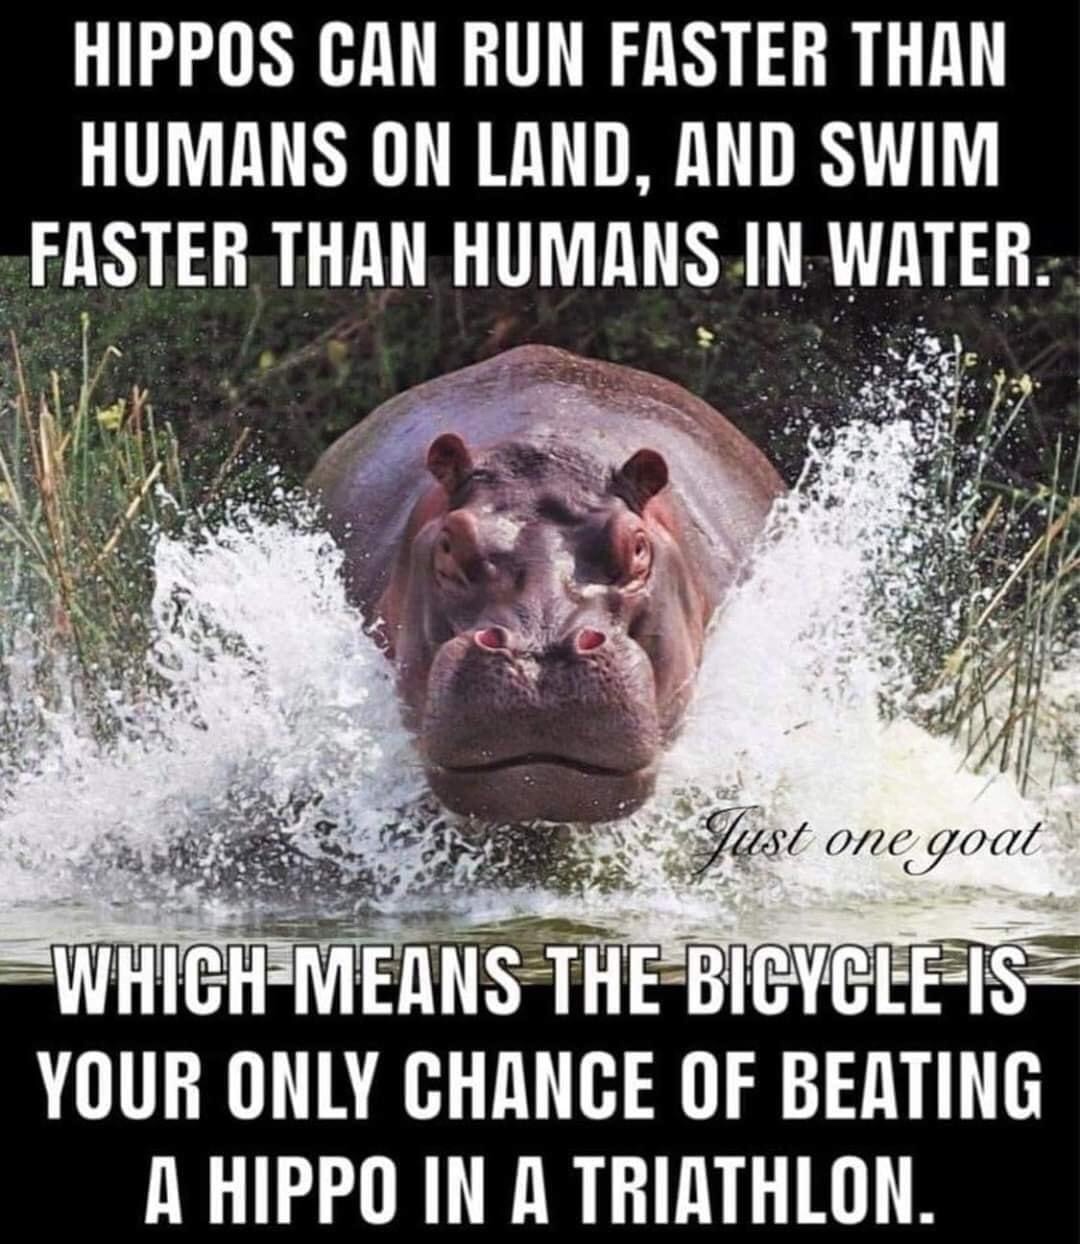 hippo triathlon - Hippos Can Run Faster Than Humans On Land, And Swim Faster Than Humans In Water. Just one goat Which Means The Bicycle Is Your Only Chance Of Beating A Hippo In A Triathlon.